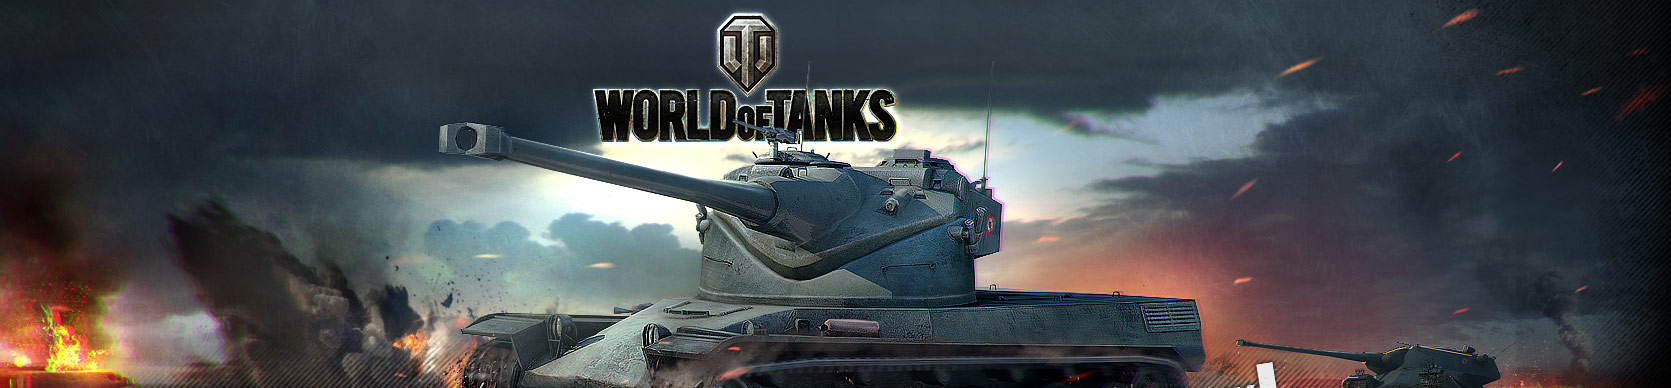 World of tanks Review